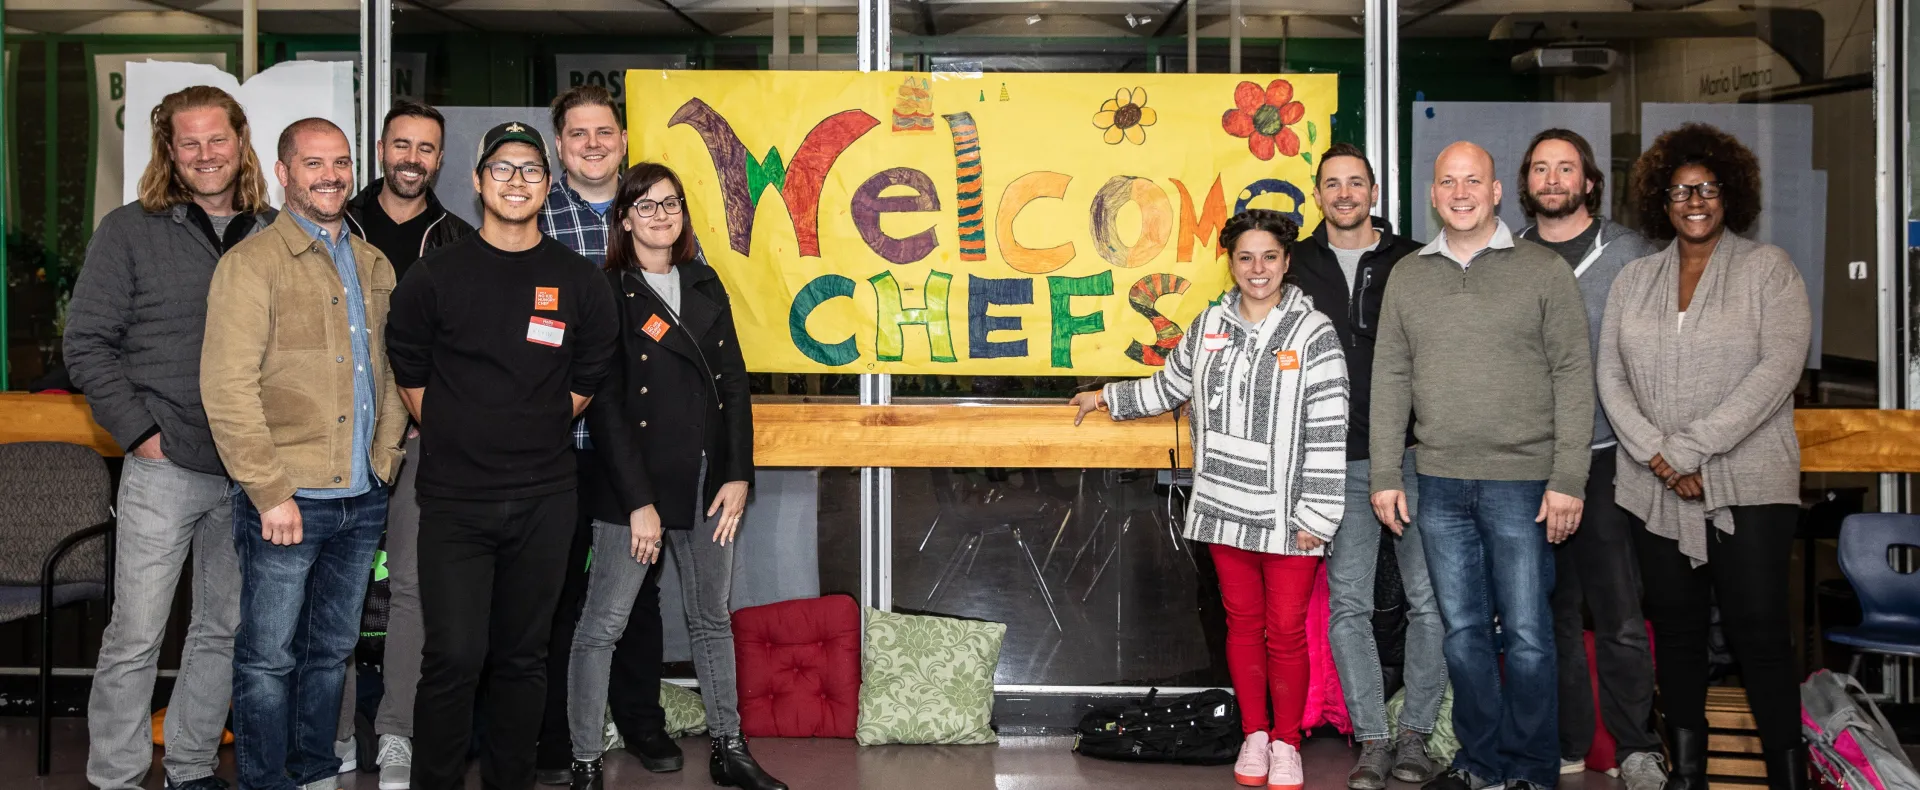 Chefs from across the country visit classrooms in Boston.